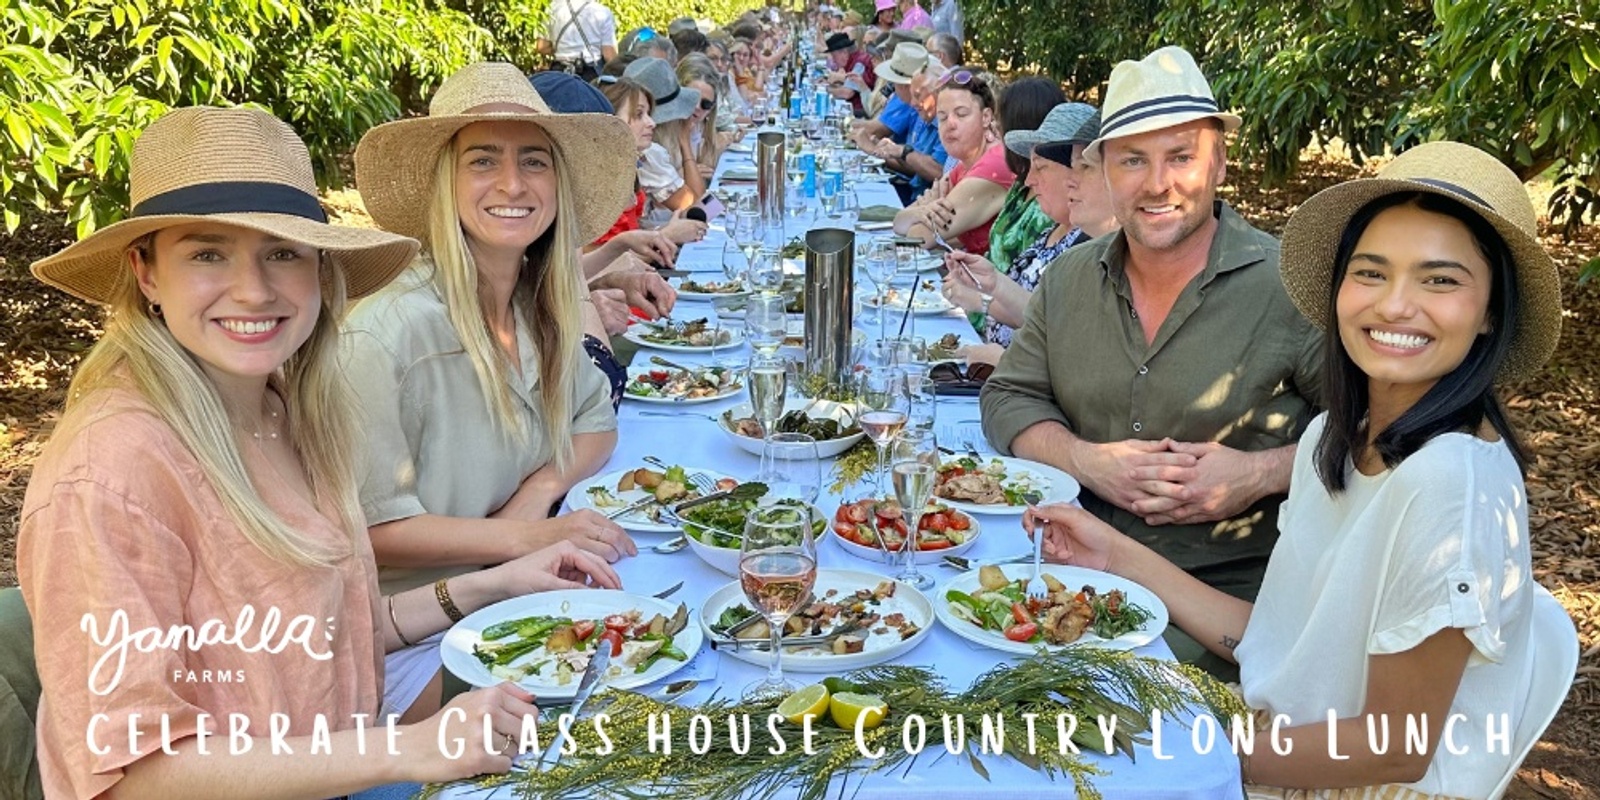 Banner image for YANALLA FARMS - Celebrate Glasshouse Country Long Lunch